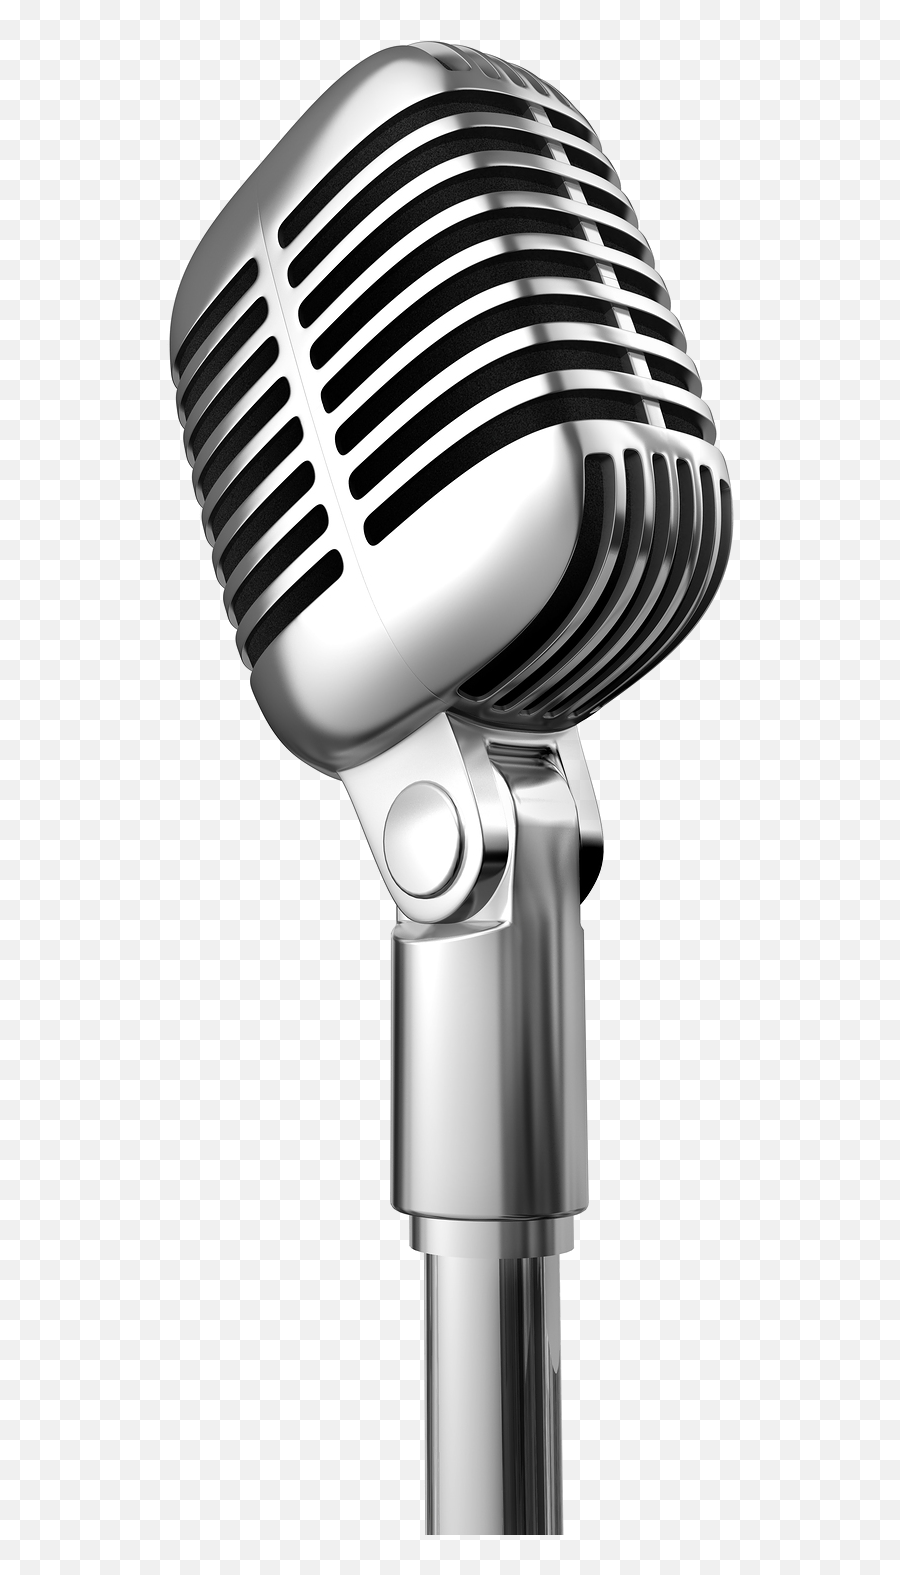 Microphone Transparent Images All Png - Clipartix Microphone Transparent Background Emoji,Emoji Gun And Microphone